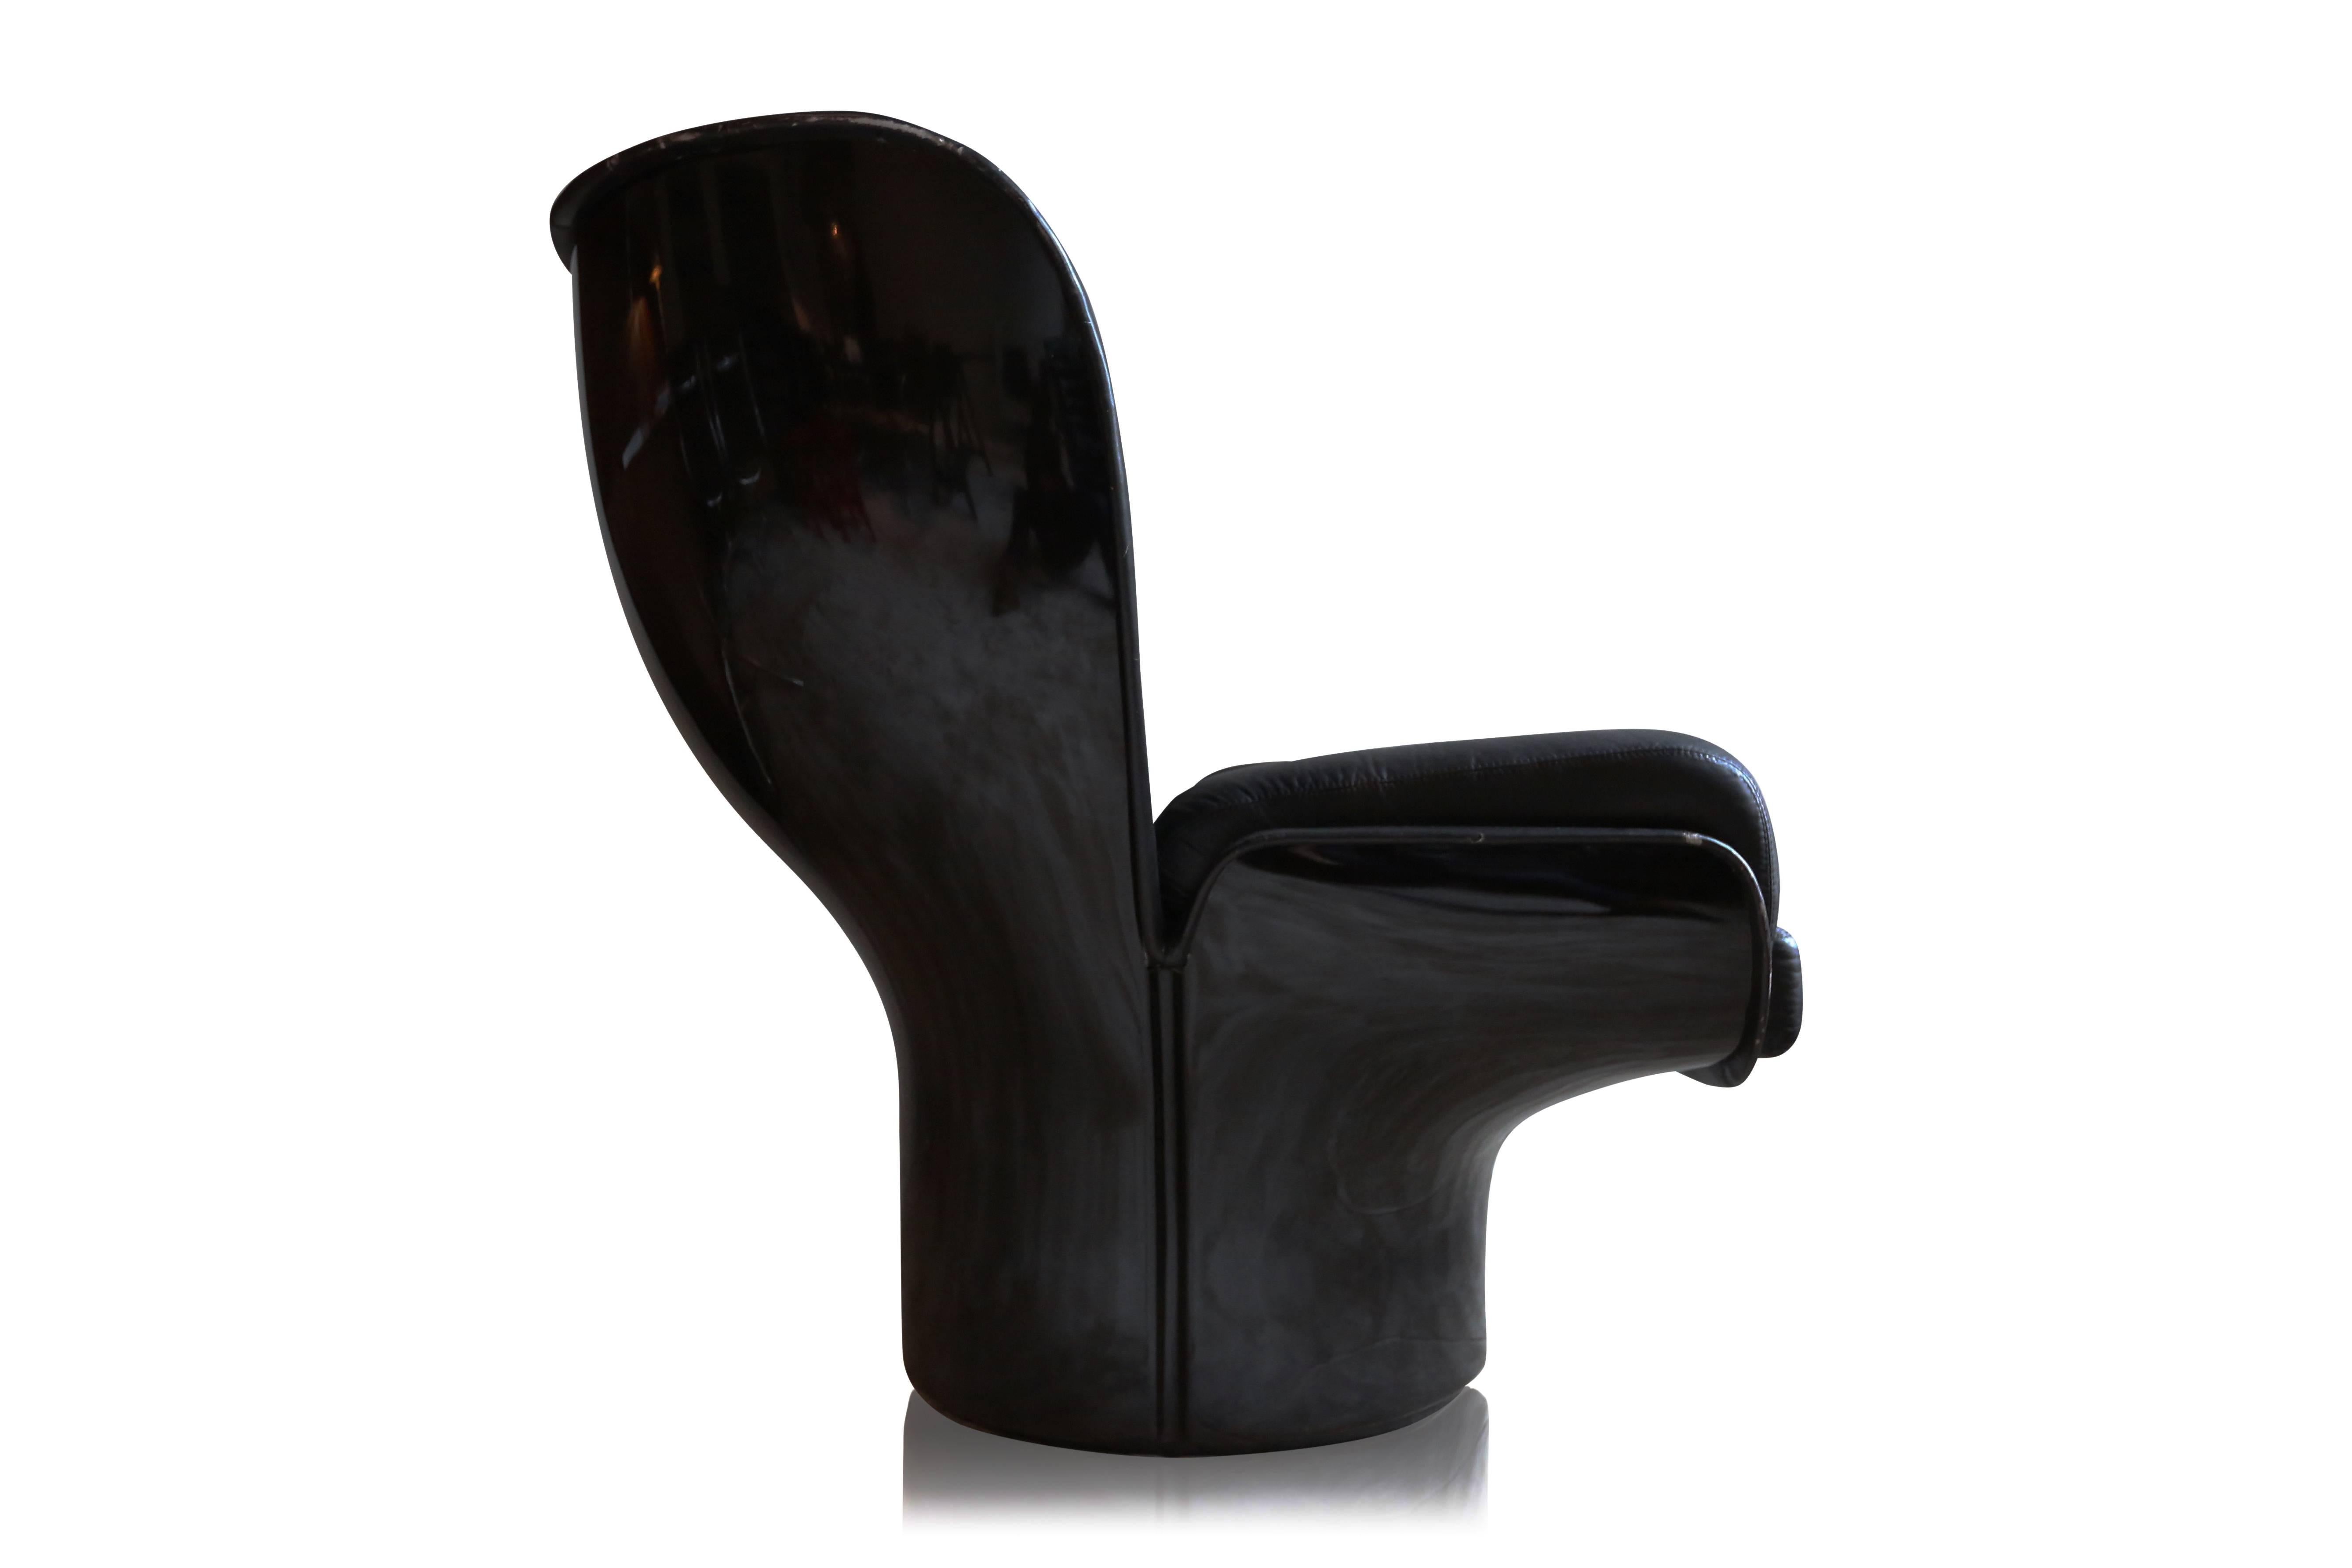 Joe Colombo's iconic Elda lounge chair for comfort.
Fiberglass body in black lacquer with black leather seating.

Italy, 1963, original state.

Measures:H 92 cm x W 100 cm x D 100 cm

We have a set of three available.
  